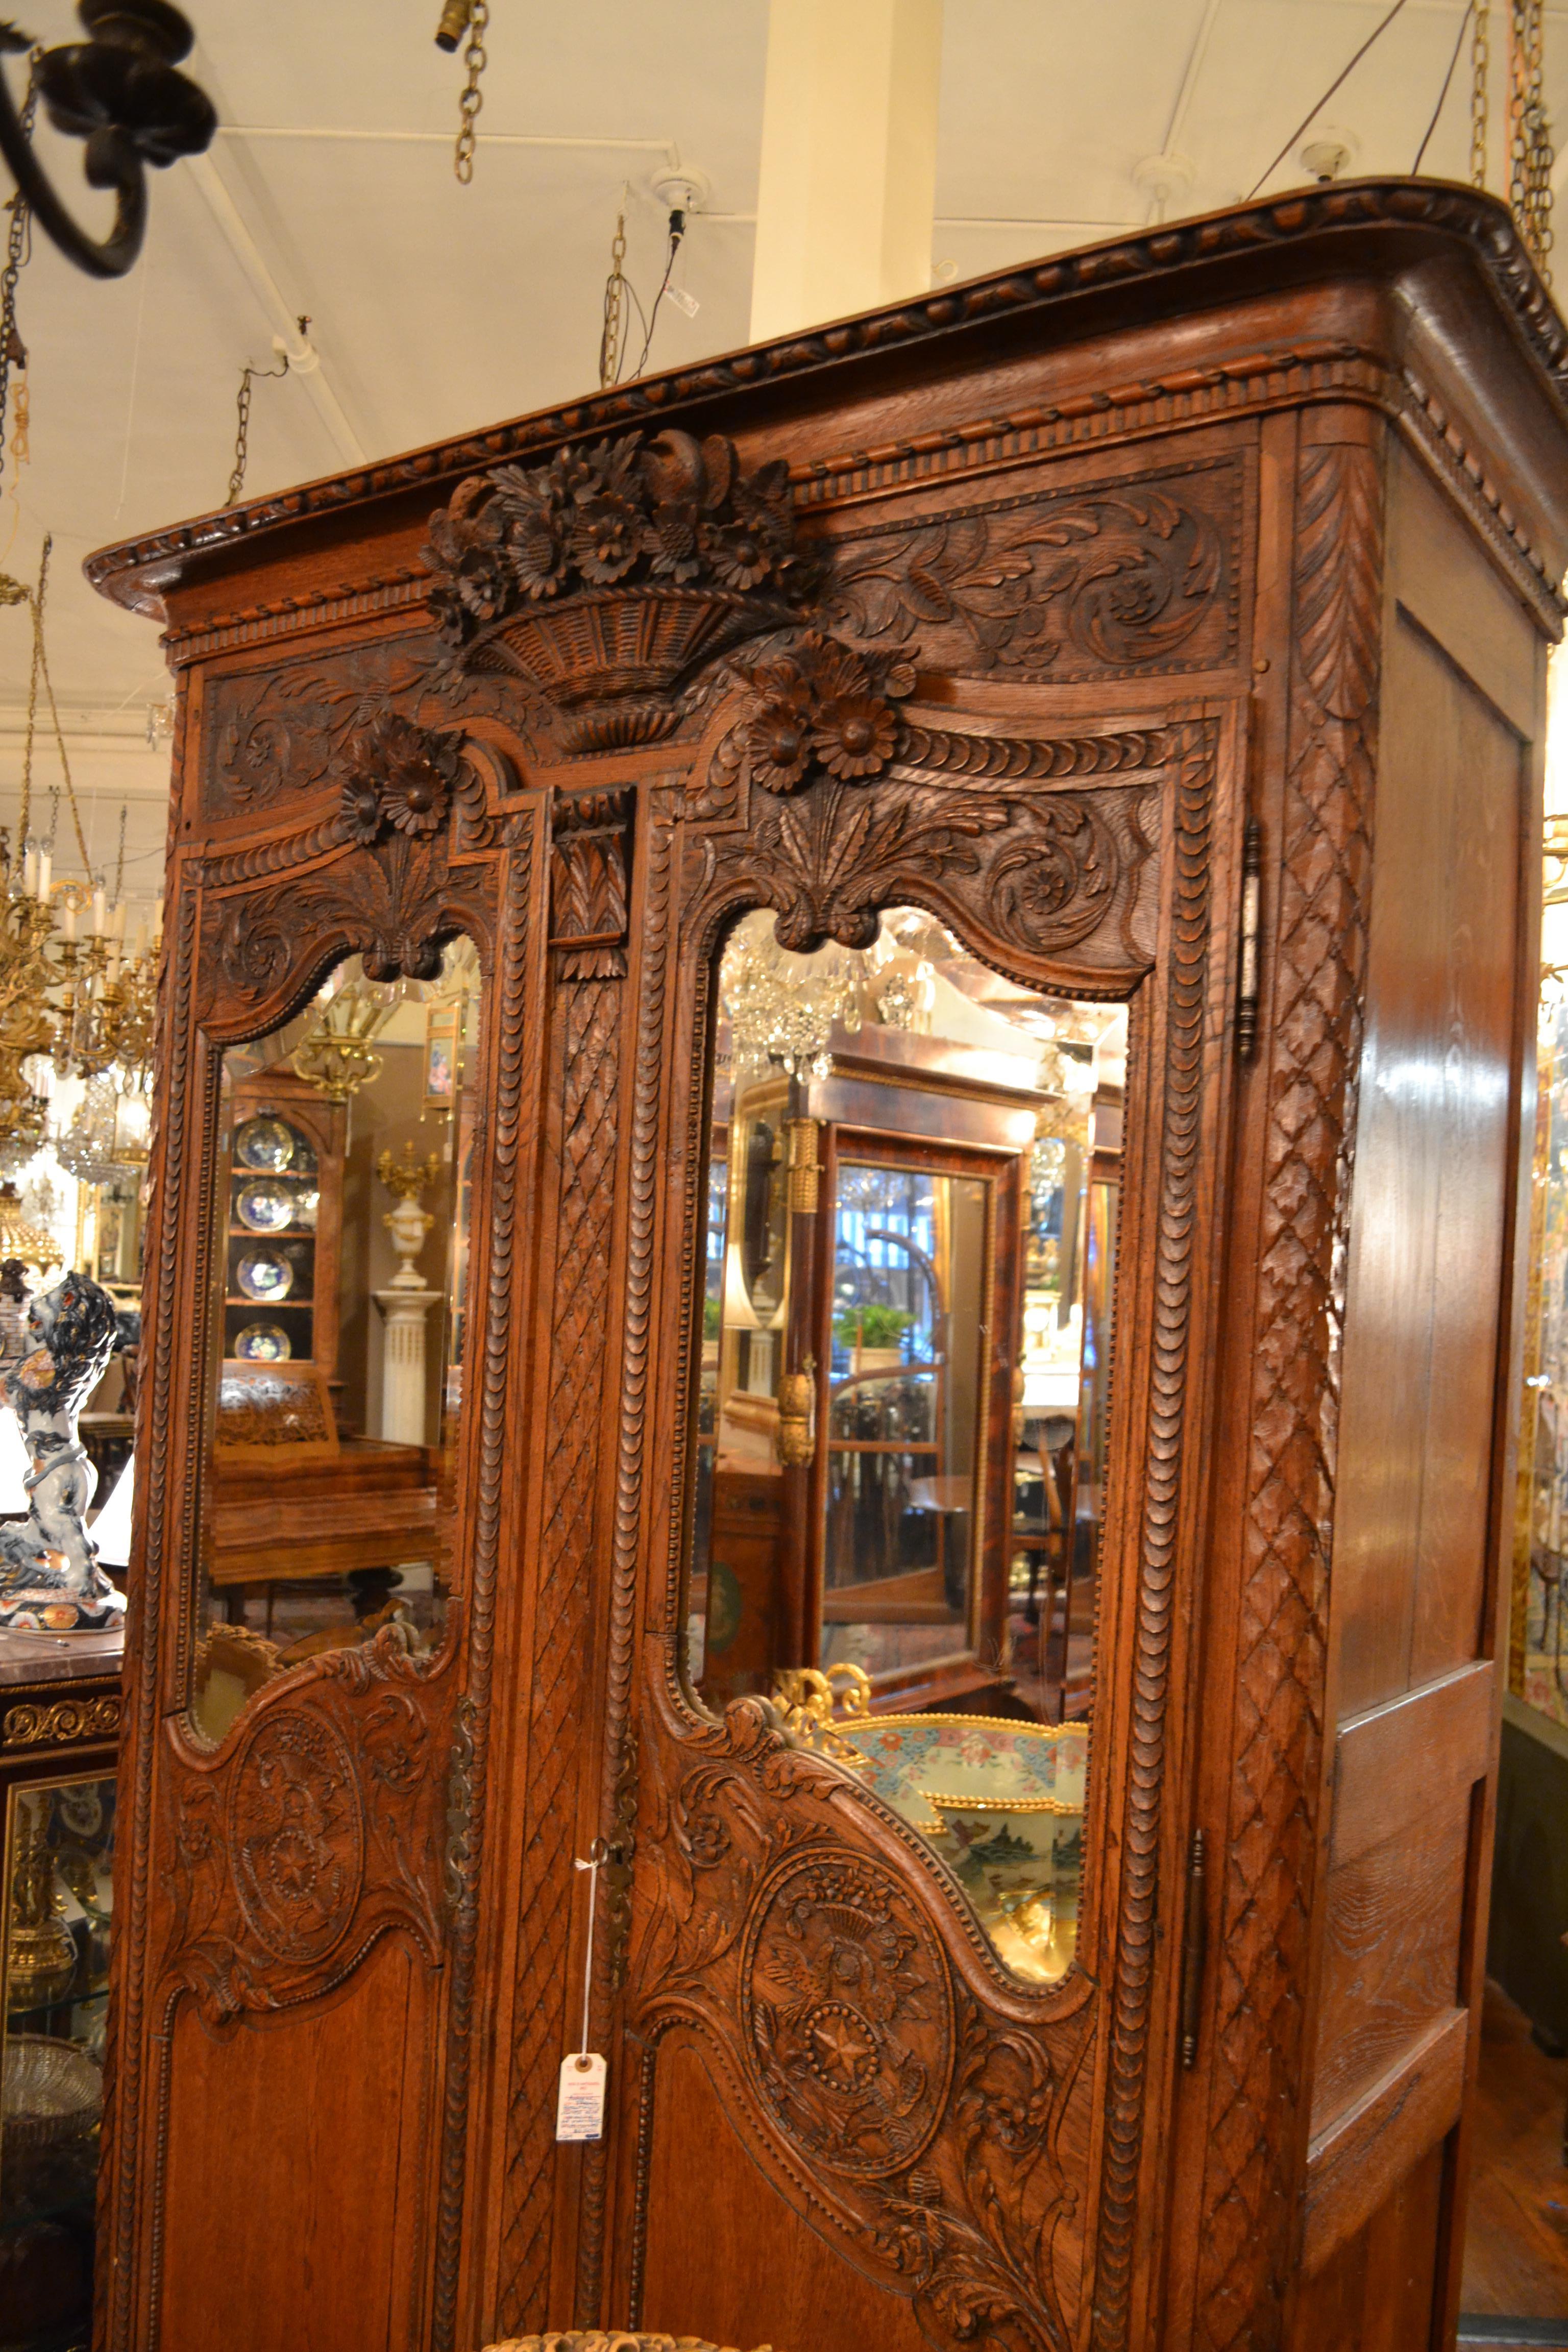 This is a beautifully carved piece with handsome nature motifs.